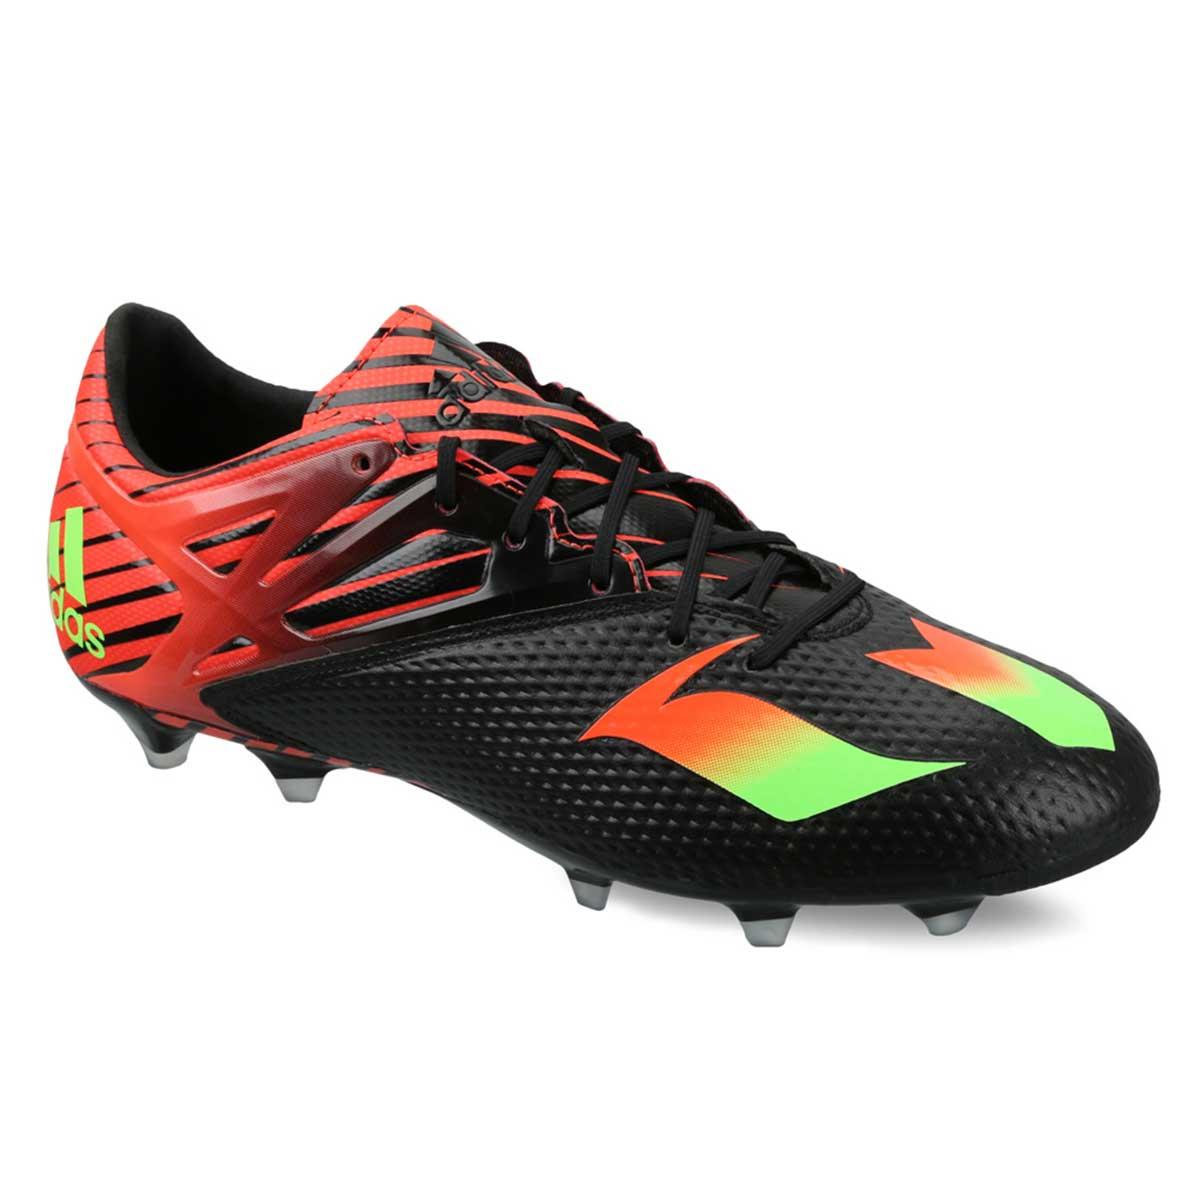 Buy Adidas Messi 15.2 Football Shoes (Black/Green/Red) Online